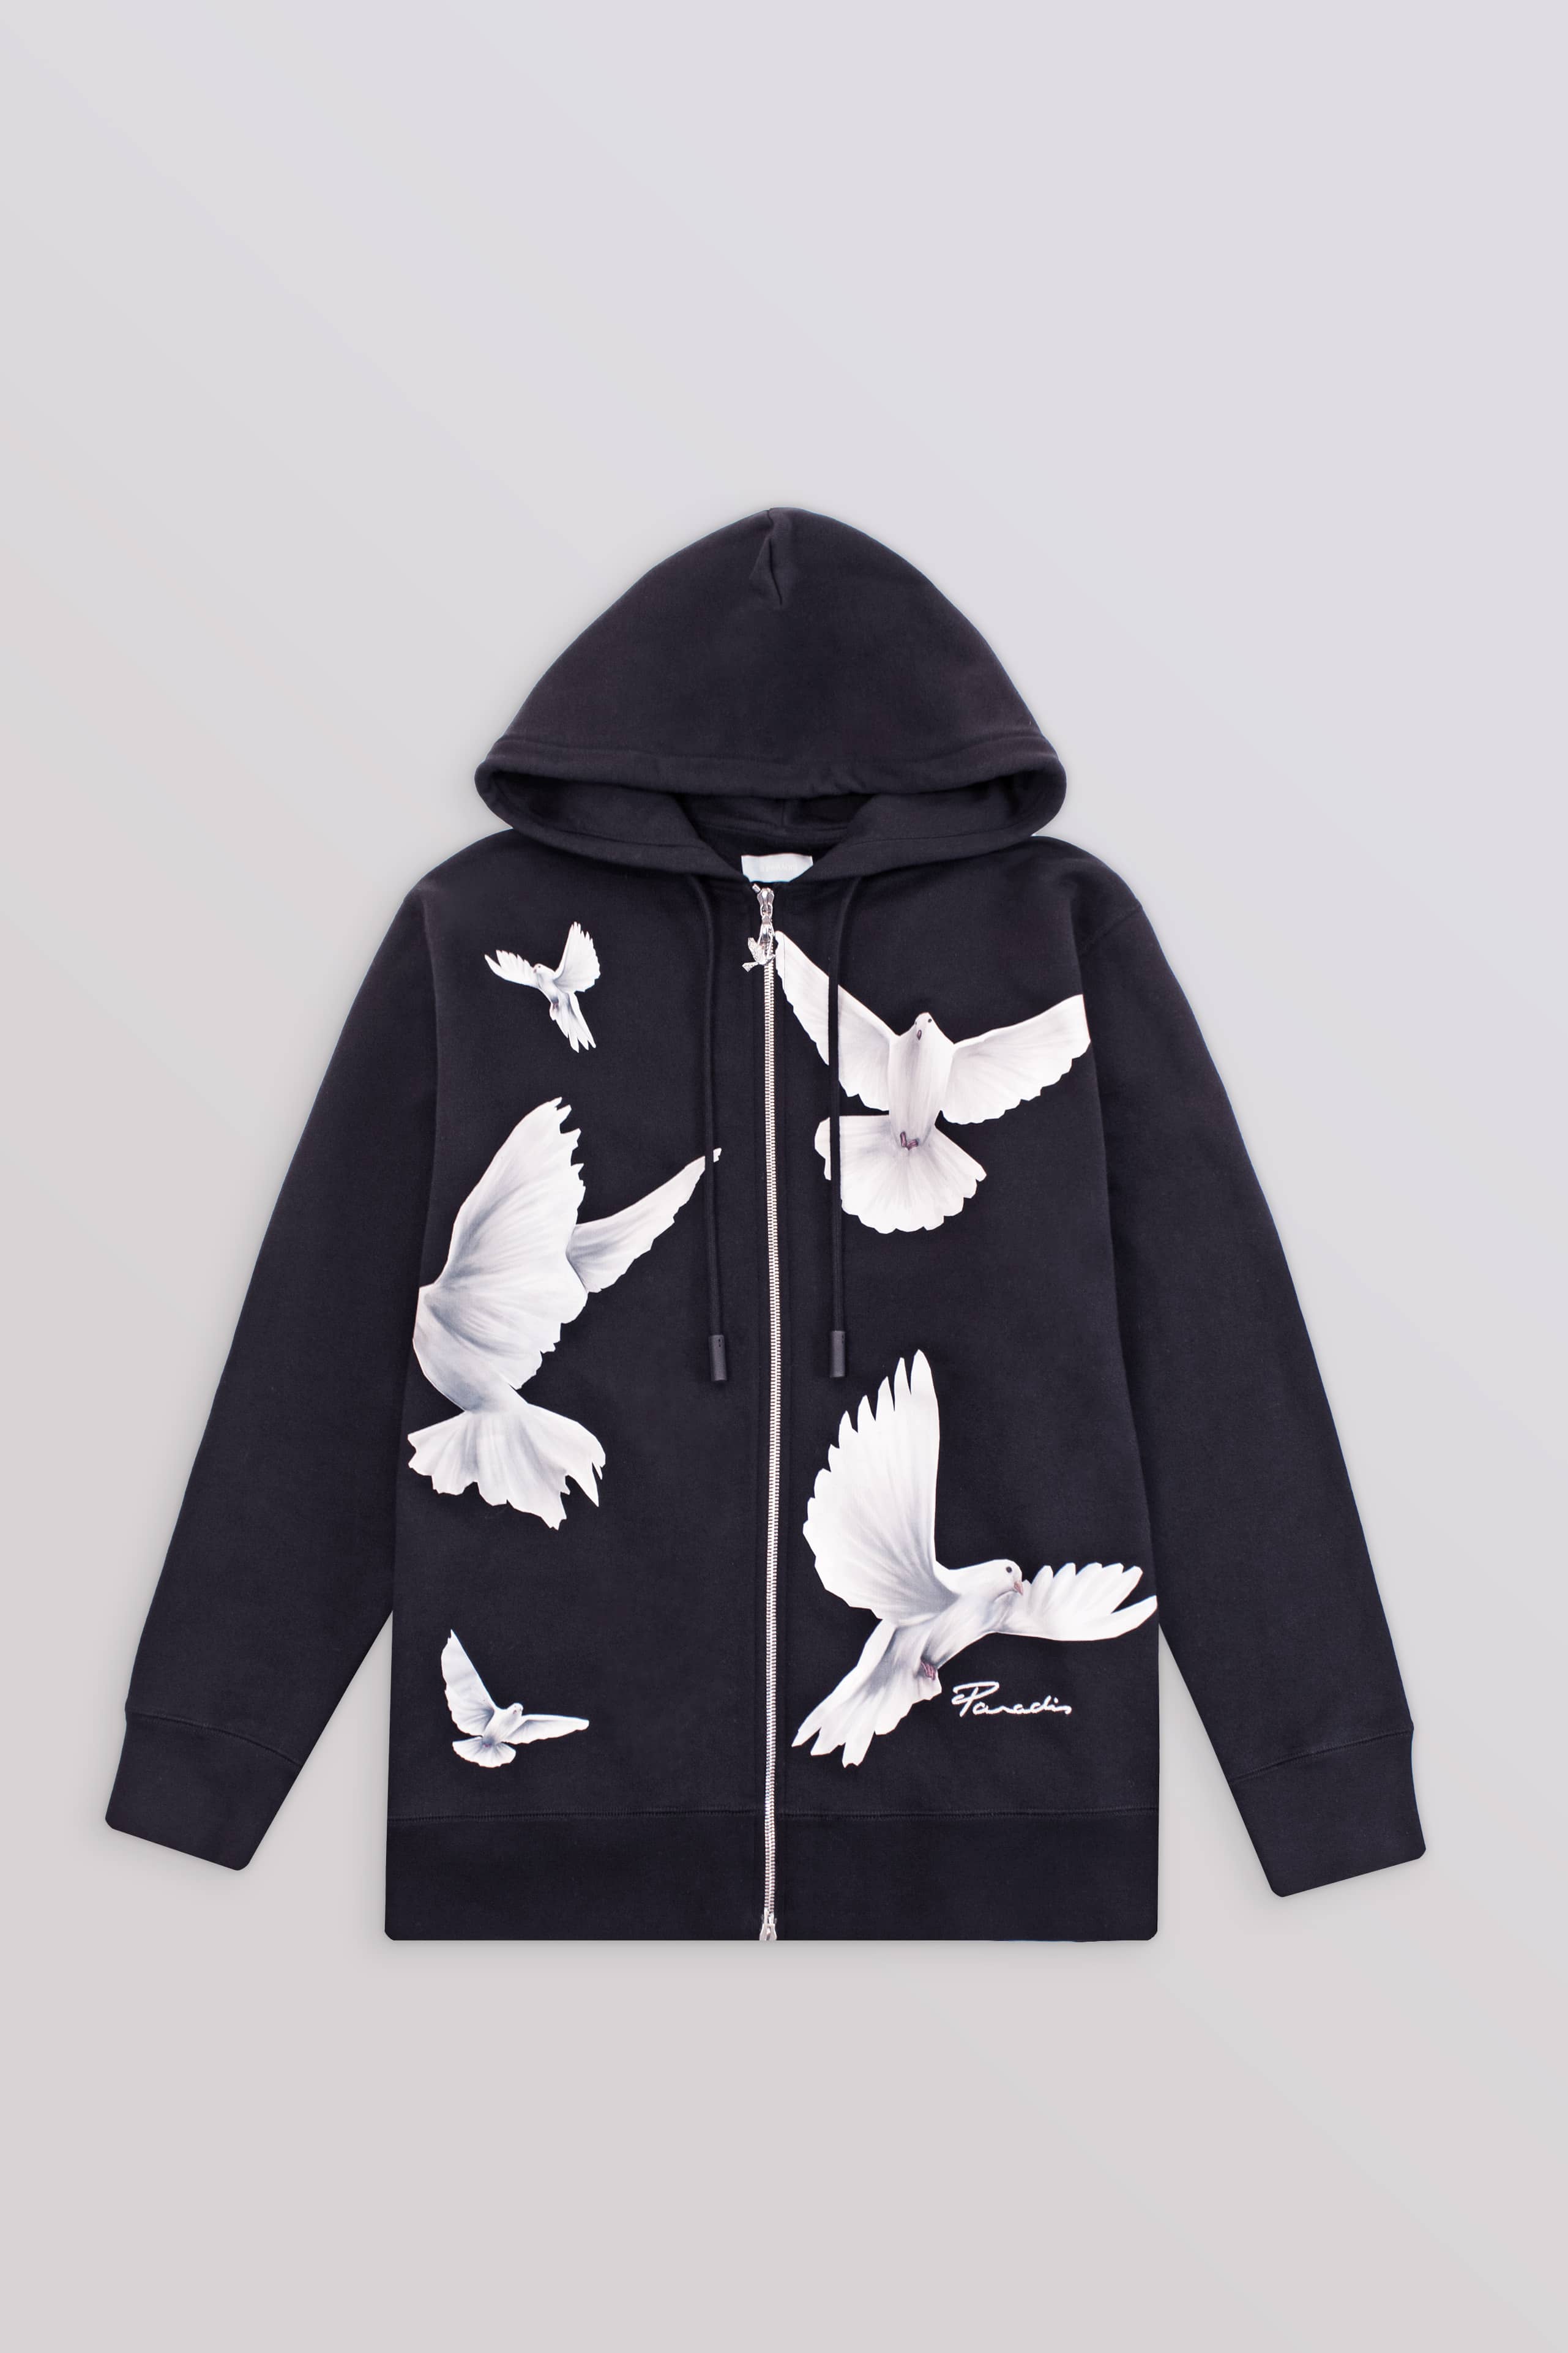 Freedom Doves Zip Hooded Sweater